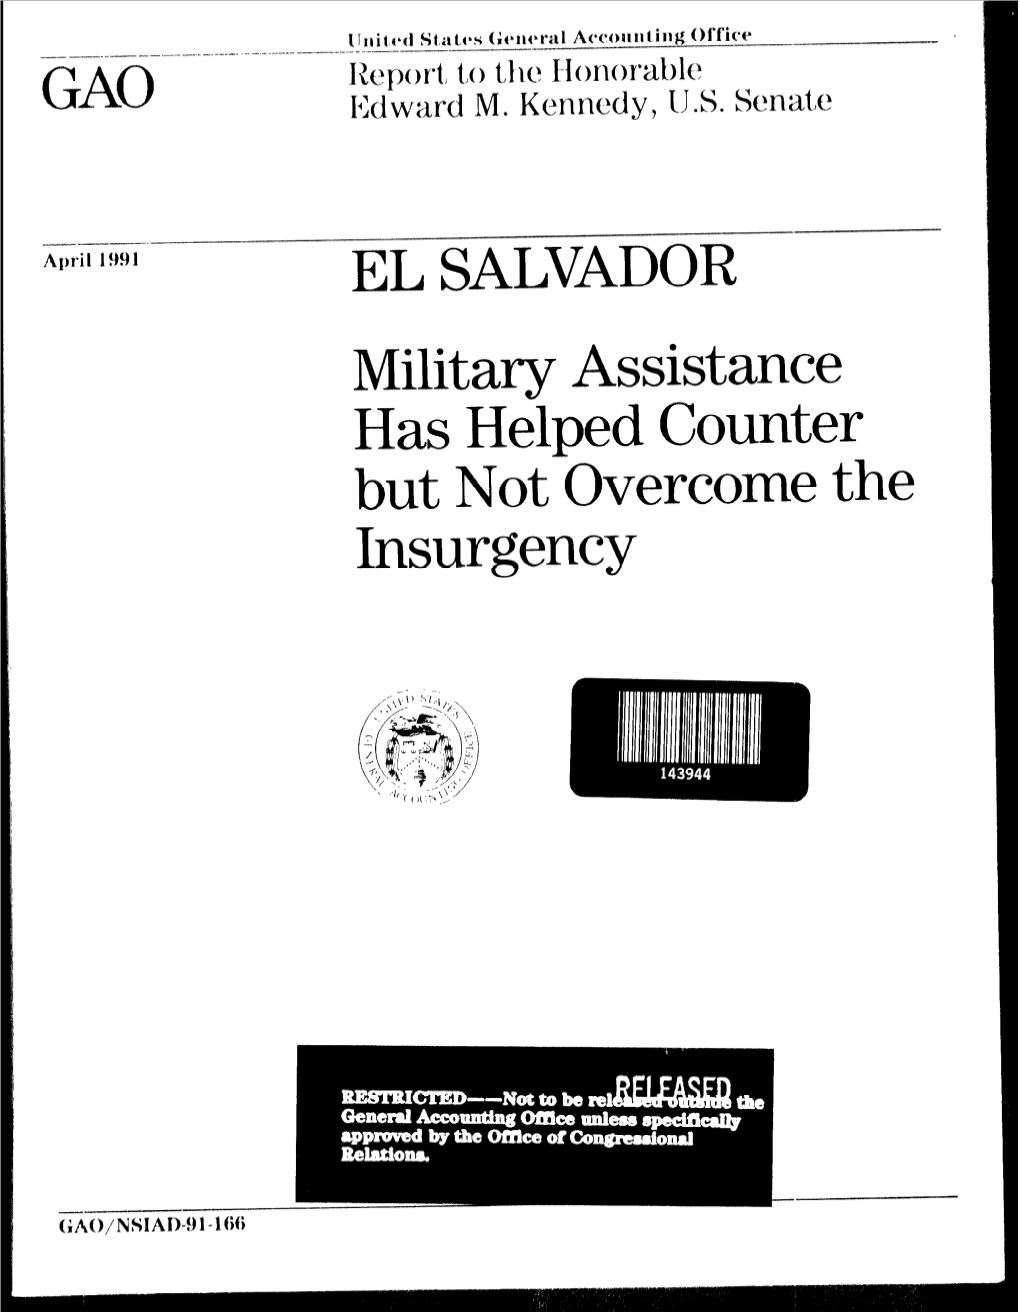 NSIAD-91-166 El Salvador: Military Assistance Has Helped Counter But